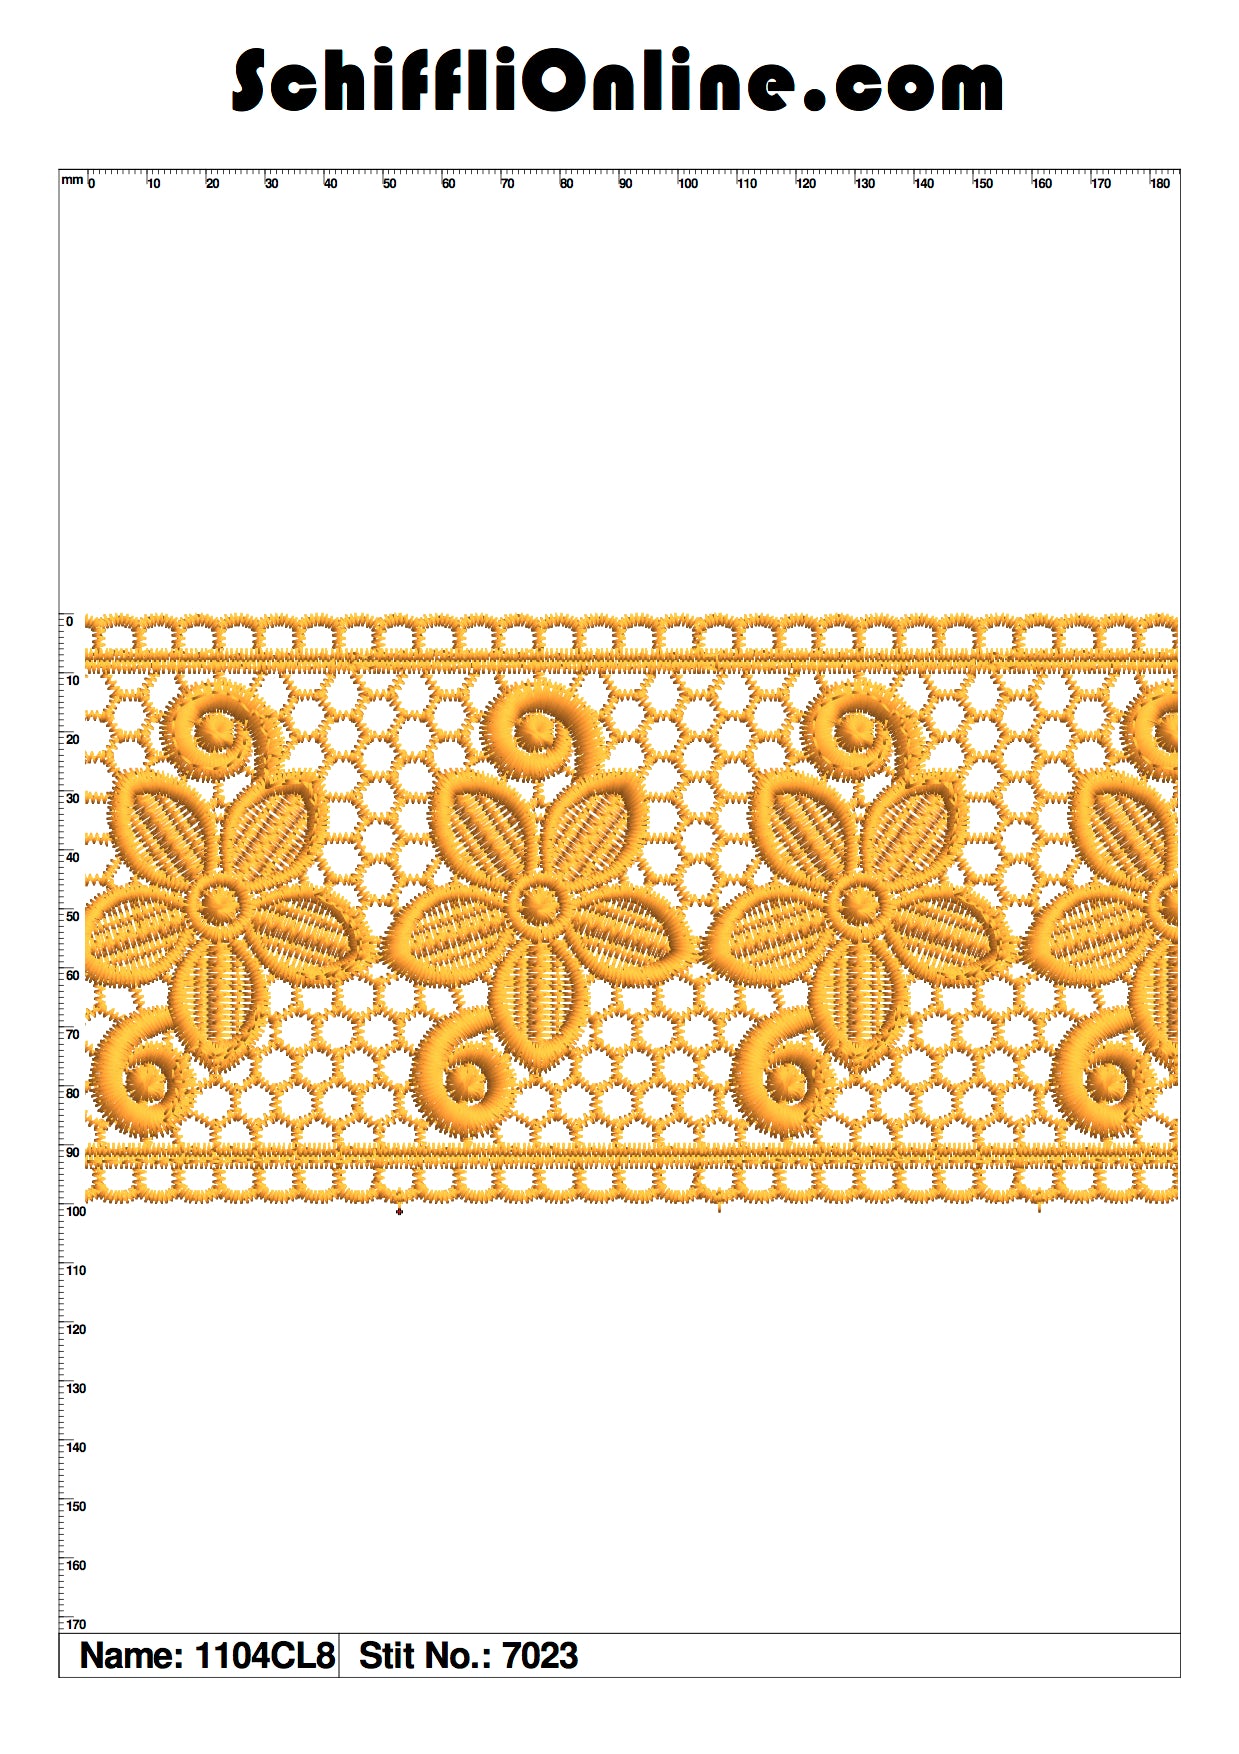 Book 139 CHEMICAL LACE 8X4 50 DESIGNS